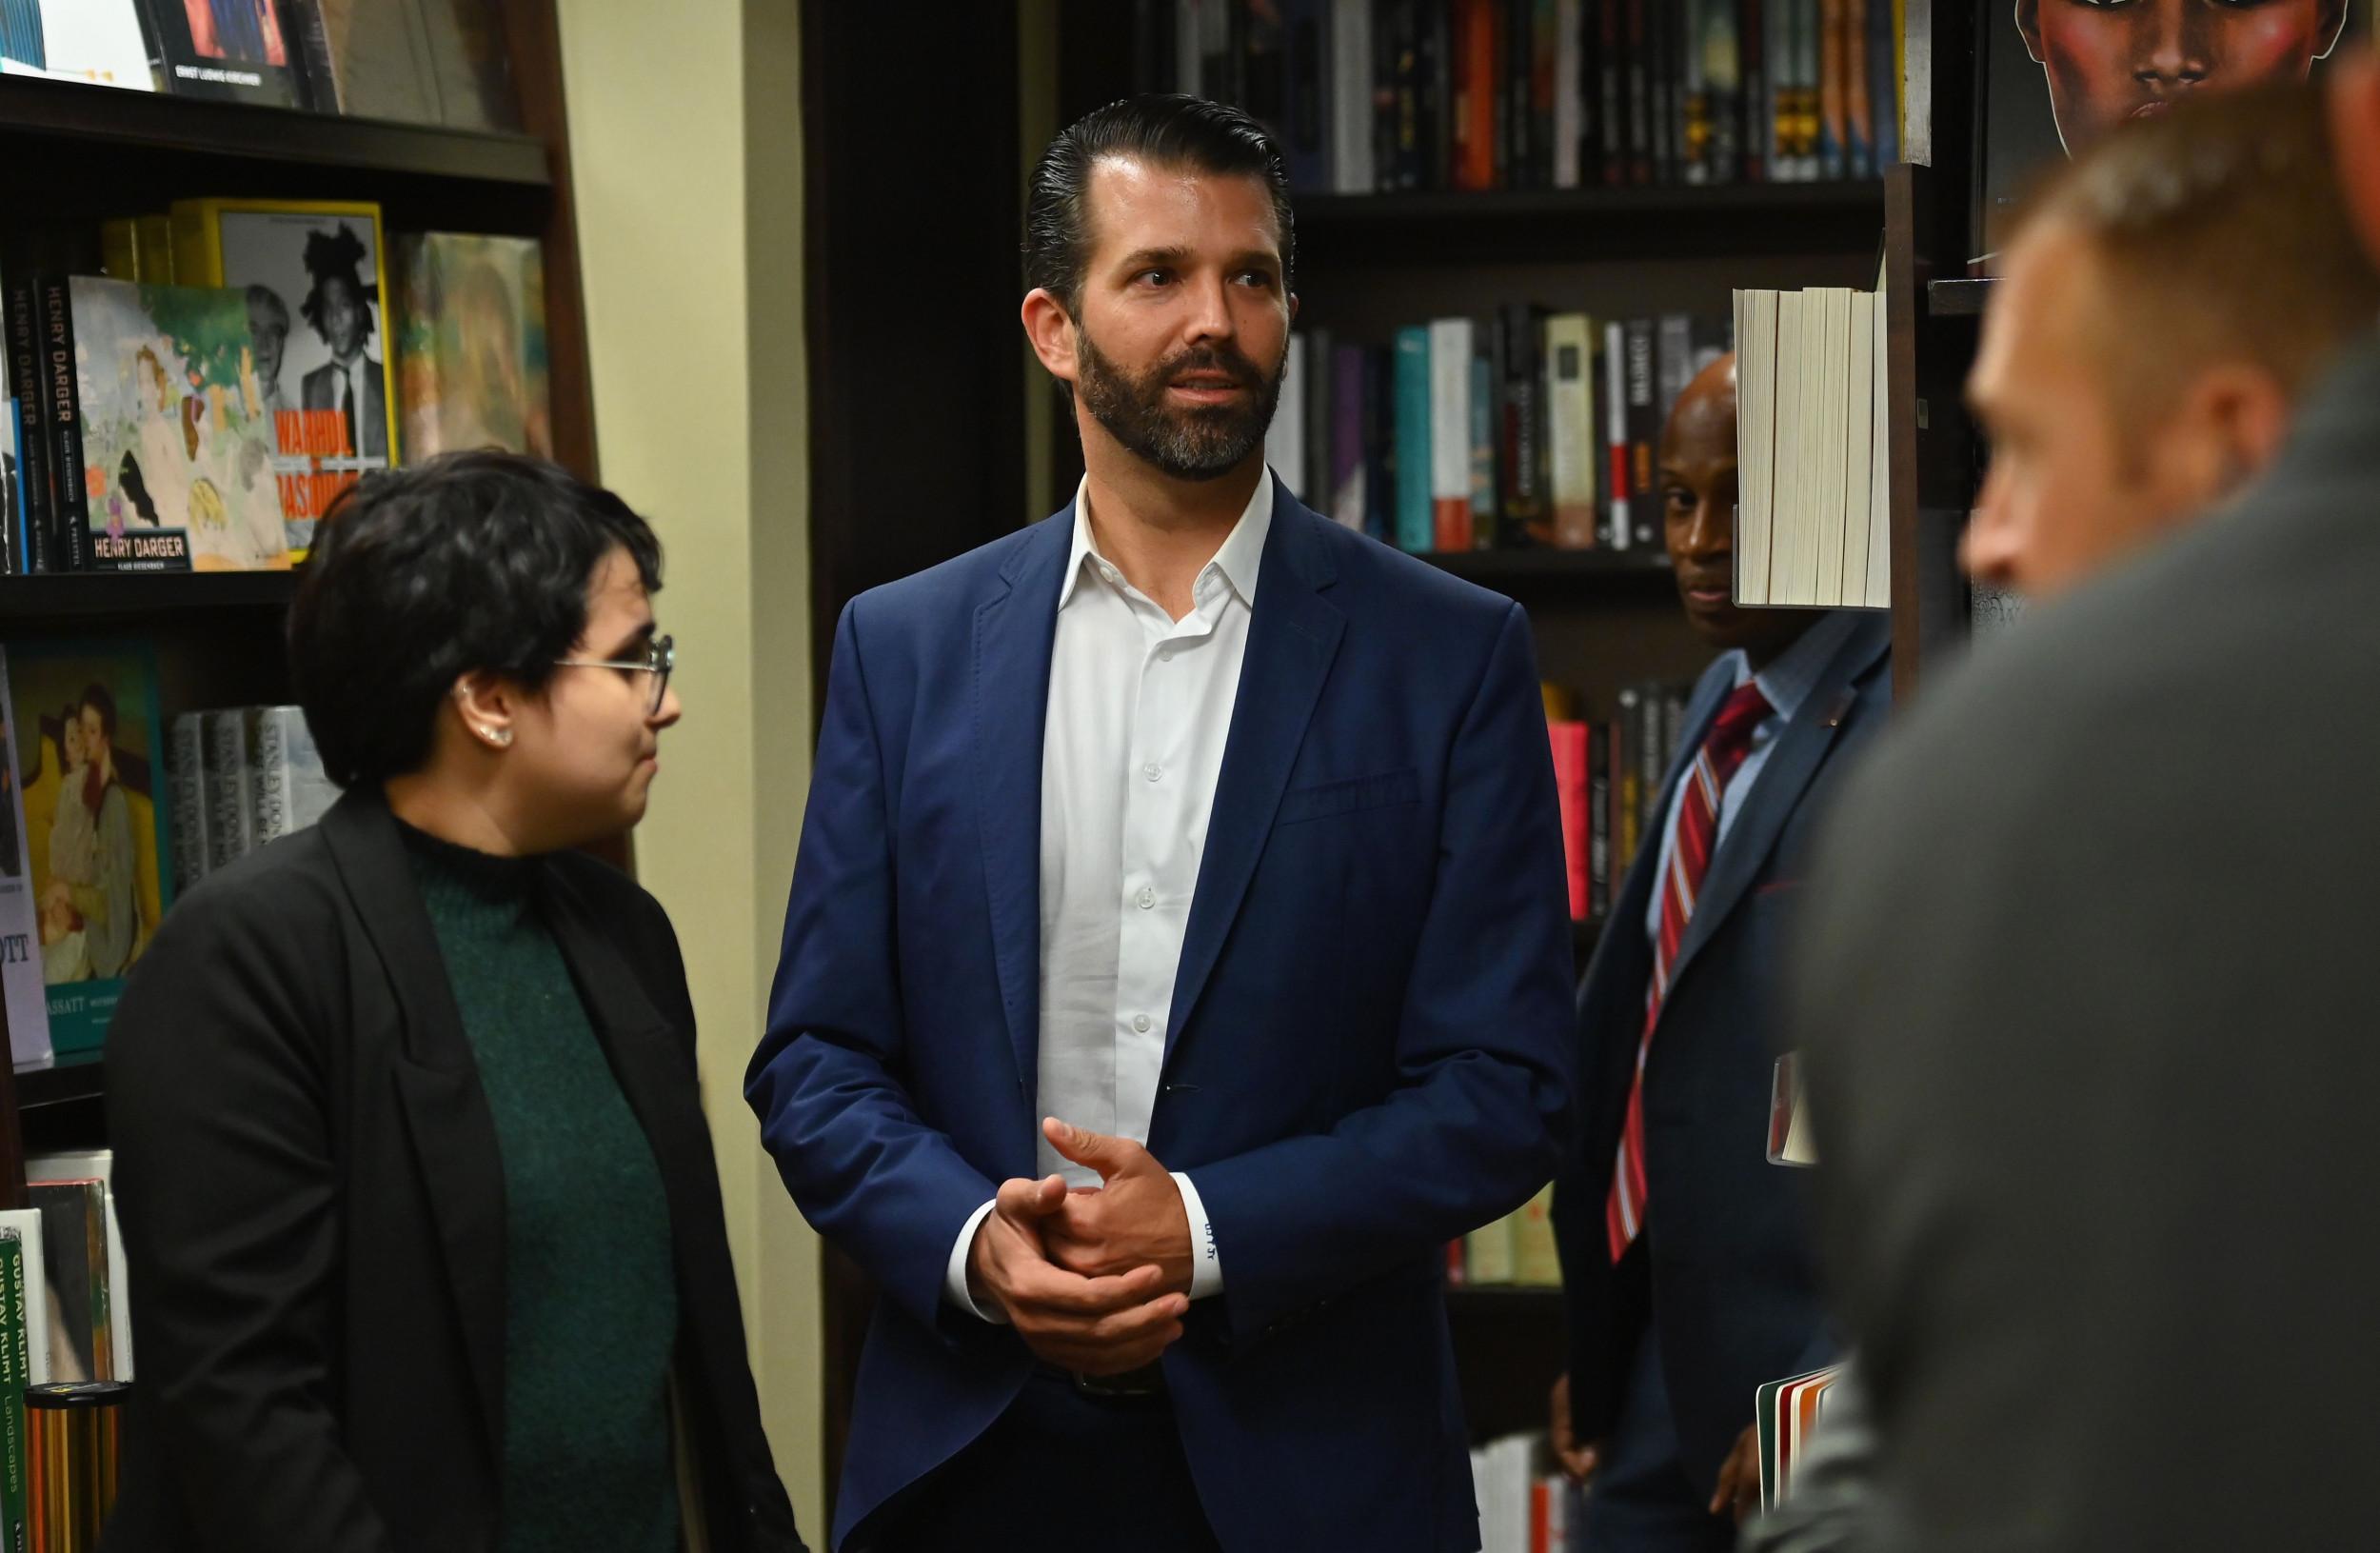 Donald Trump Jr and Kimberly Guilfoyle Booed at Book Launch